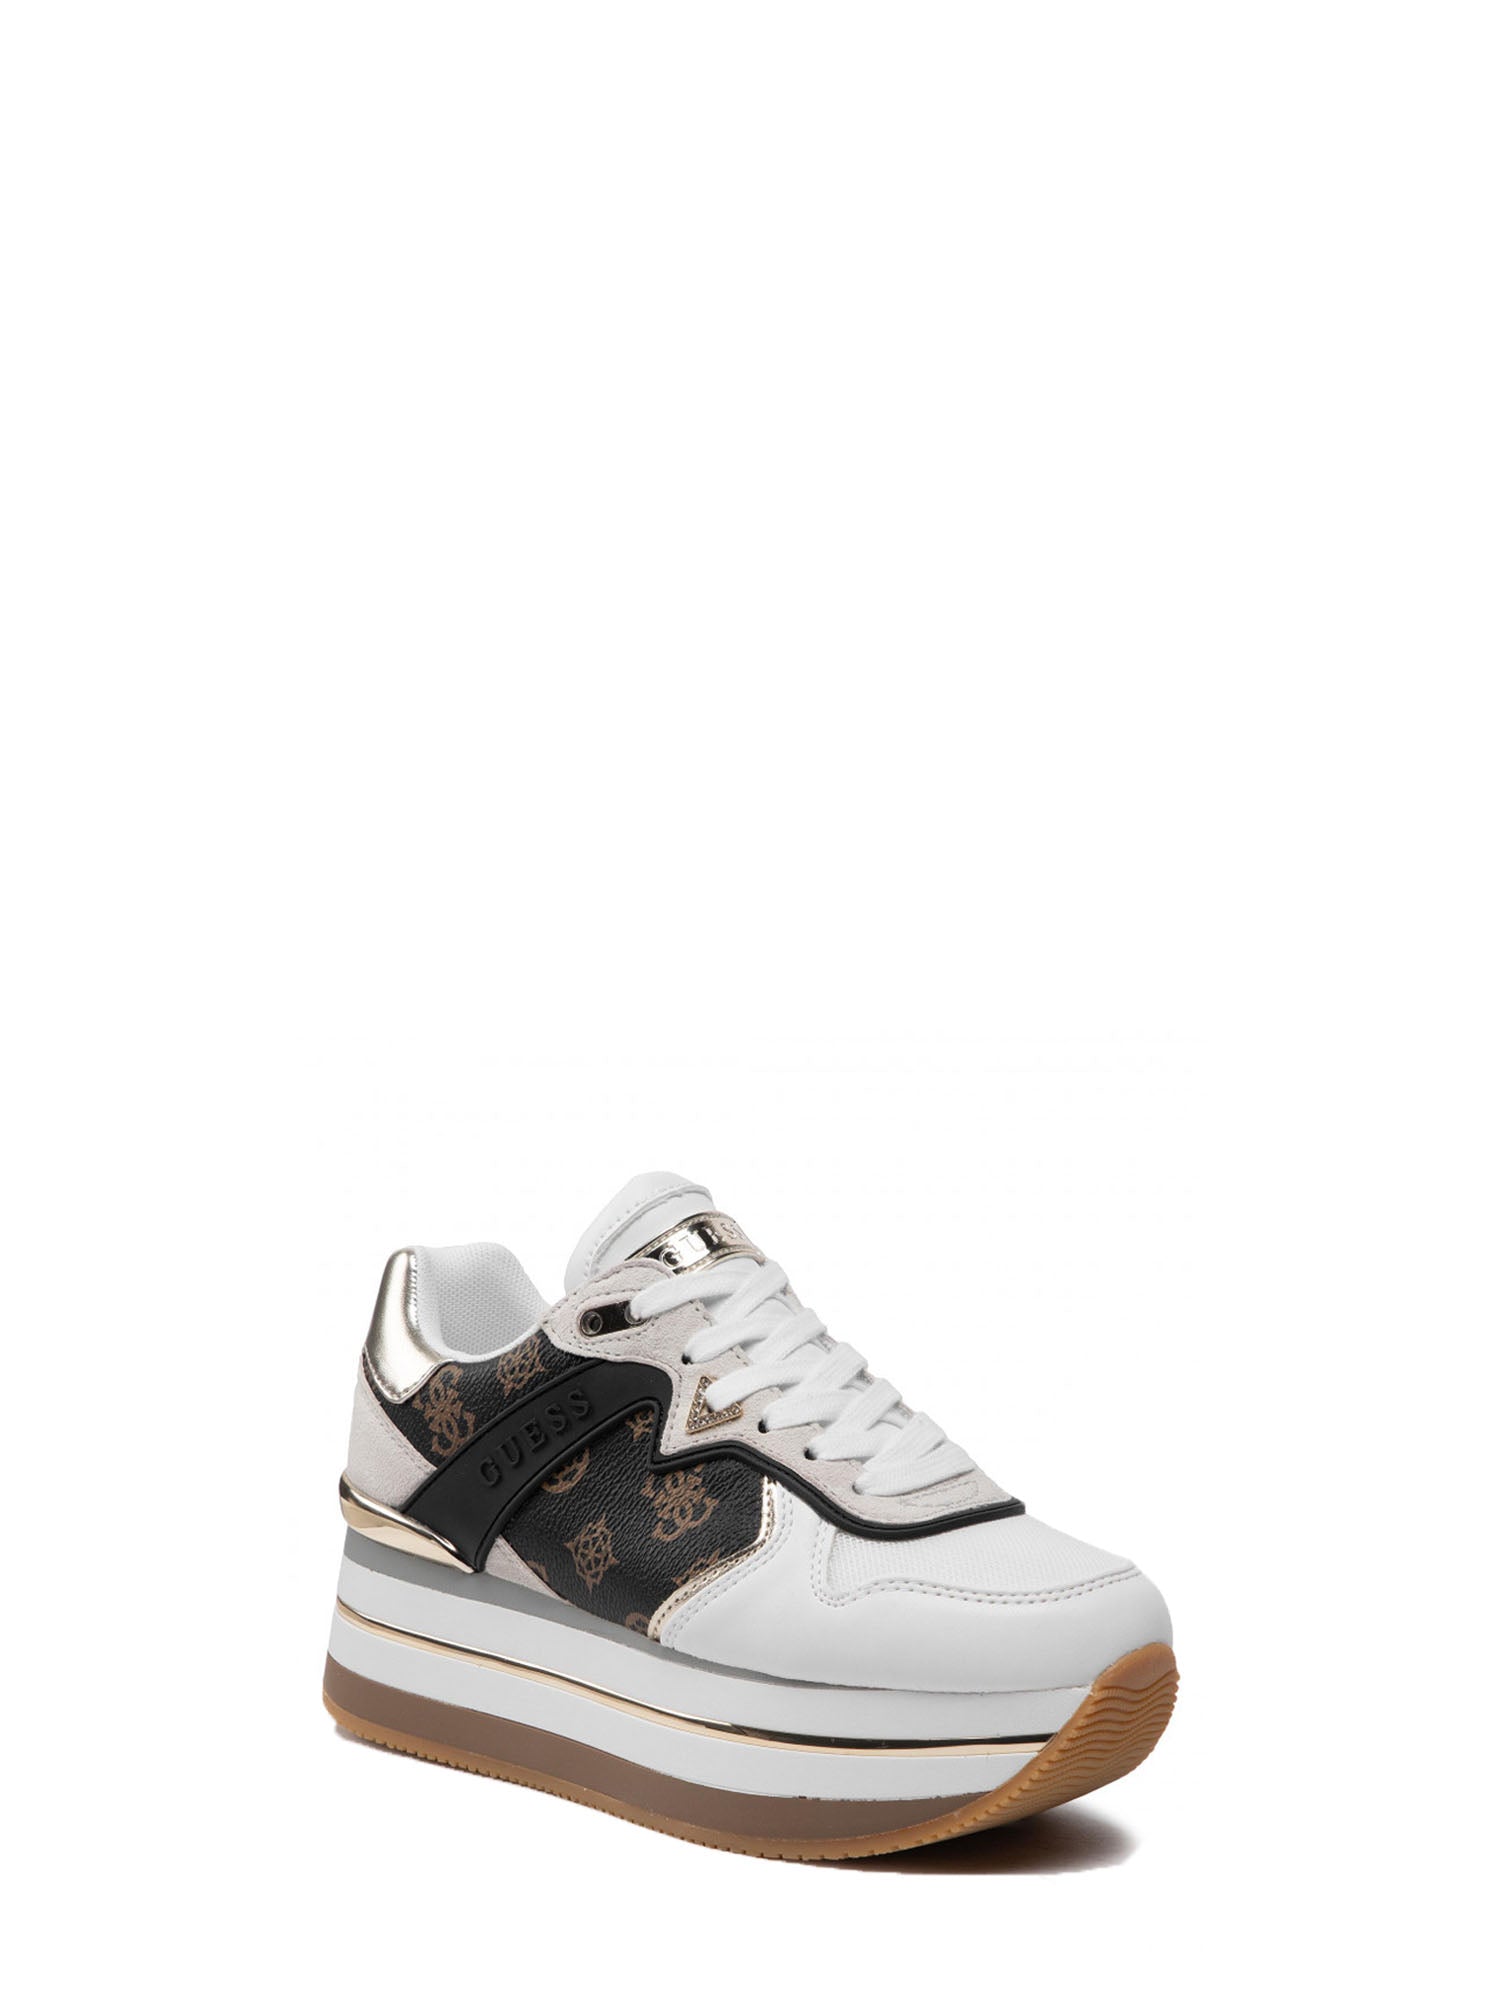 GUESS JEANS SNEAKERS HARINNA MARRONE - BIANCO